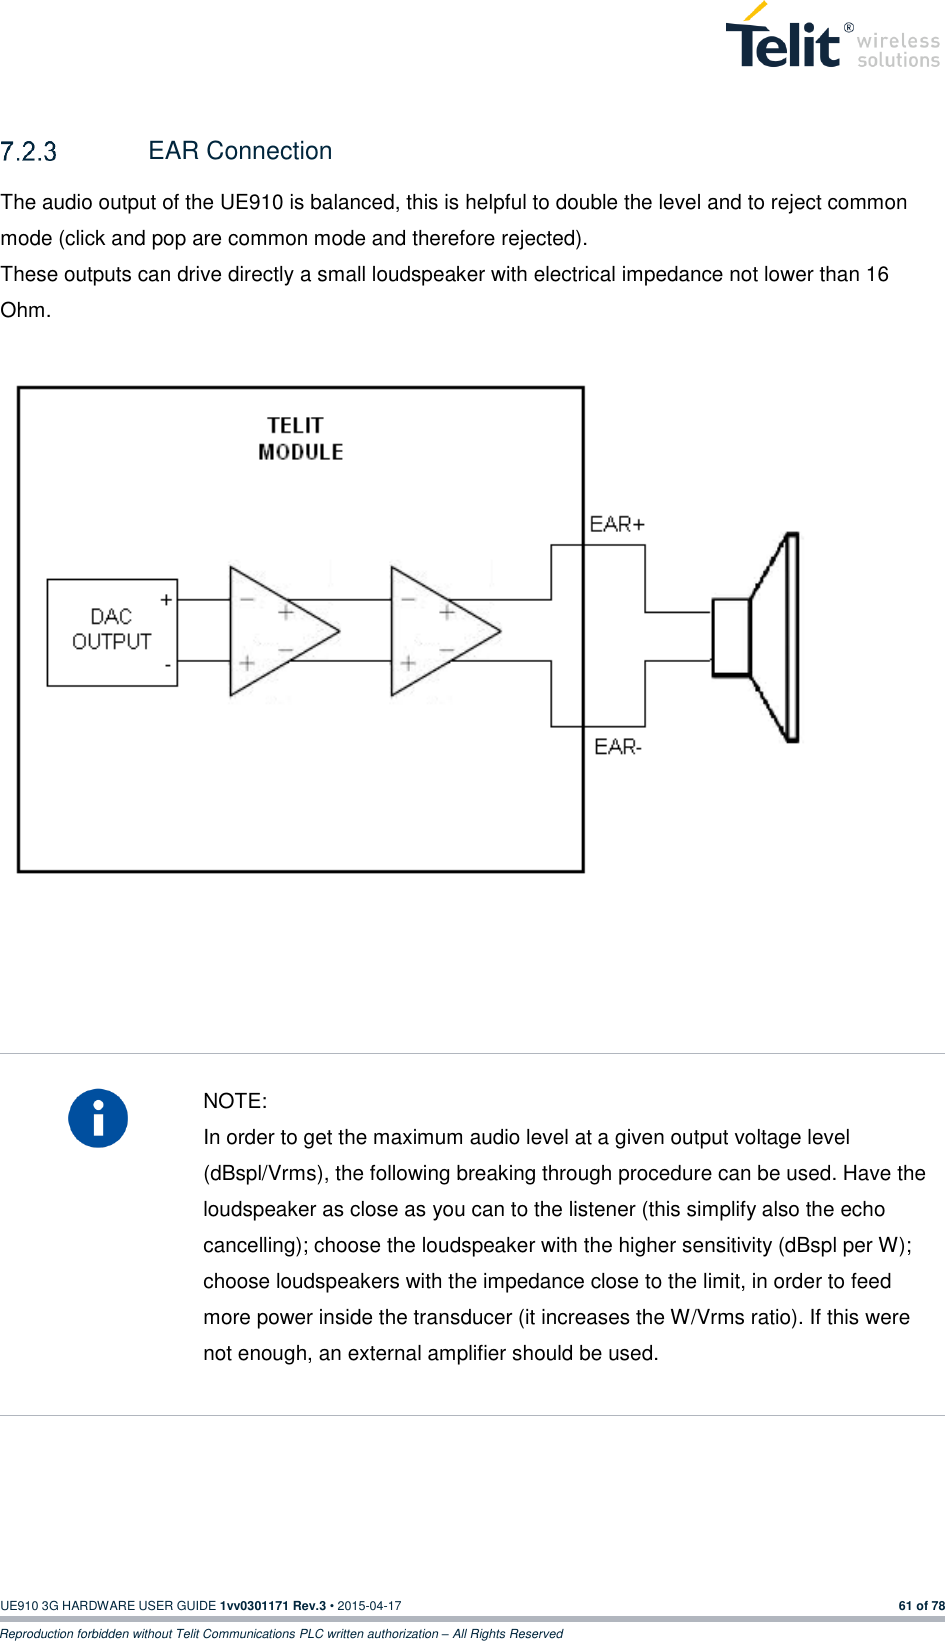  UE910 3G HARDWARE USER GUIDE 1vv0301171 Rev.3 • 2015-04-17 61 of 78 Reproduction forbidden without Telit Communications PLC written authorization – All Rights Reserved    EAR Connection The audio output of the UE910 is balanced, this is helpful to double the level and to reject common mode (click and pop are common mode and therefore rejected). These outputs can drive directly a small loudspeaker with electrical impedance not lower than 16 Ohm.                       NOTE: In order to get the maximum audio level at a given output voltage level (dBspl/Vrms), the following breaking through procedure can be used. Have the loudspeaker as close as you can to the listener (this simplify also the echo cancelling); choose the loudspeaker with the higher sensitivity (dBspl per W); choose loudspeakers with the impedance close to the limit, in order to feed more power inside the transducer (it increases the W/Vrms ratio). If this were not enough, an external amplifier should be used.    